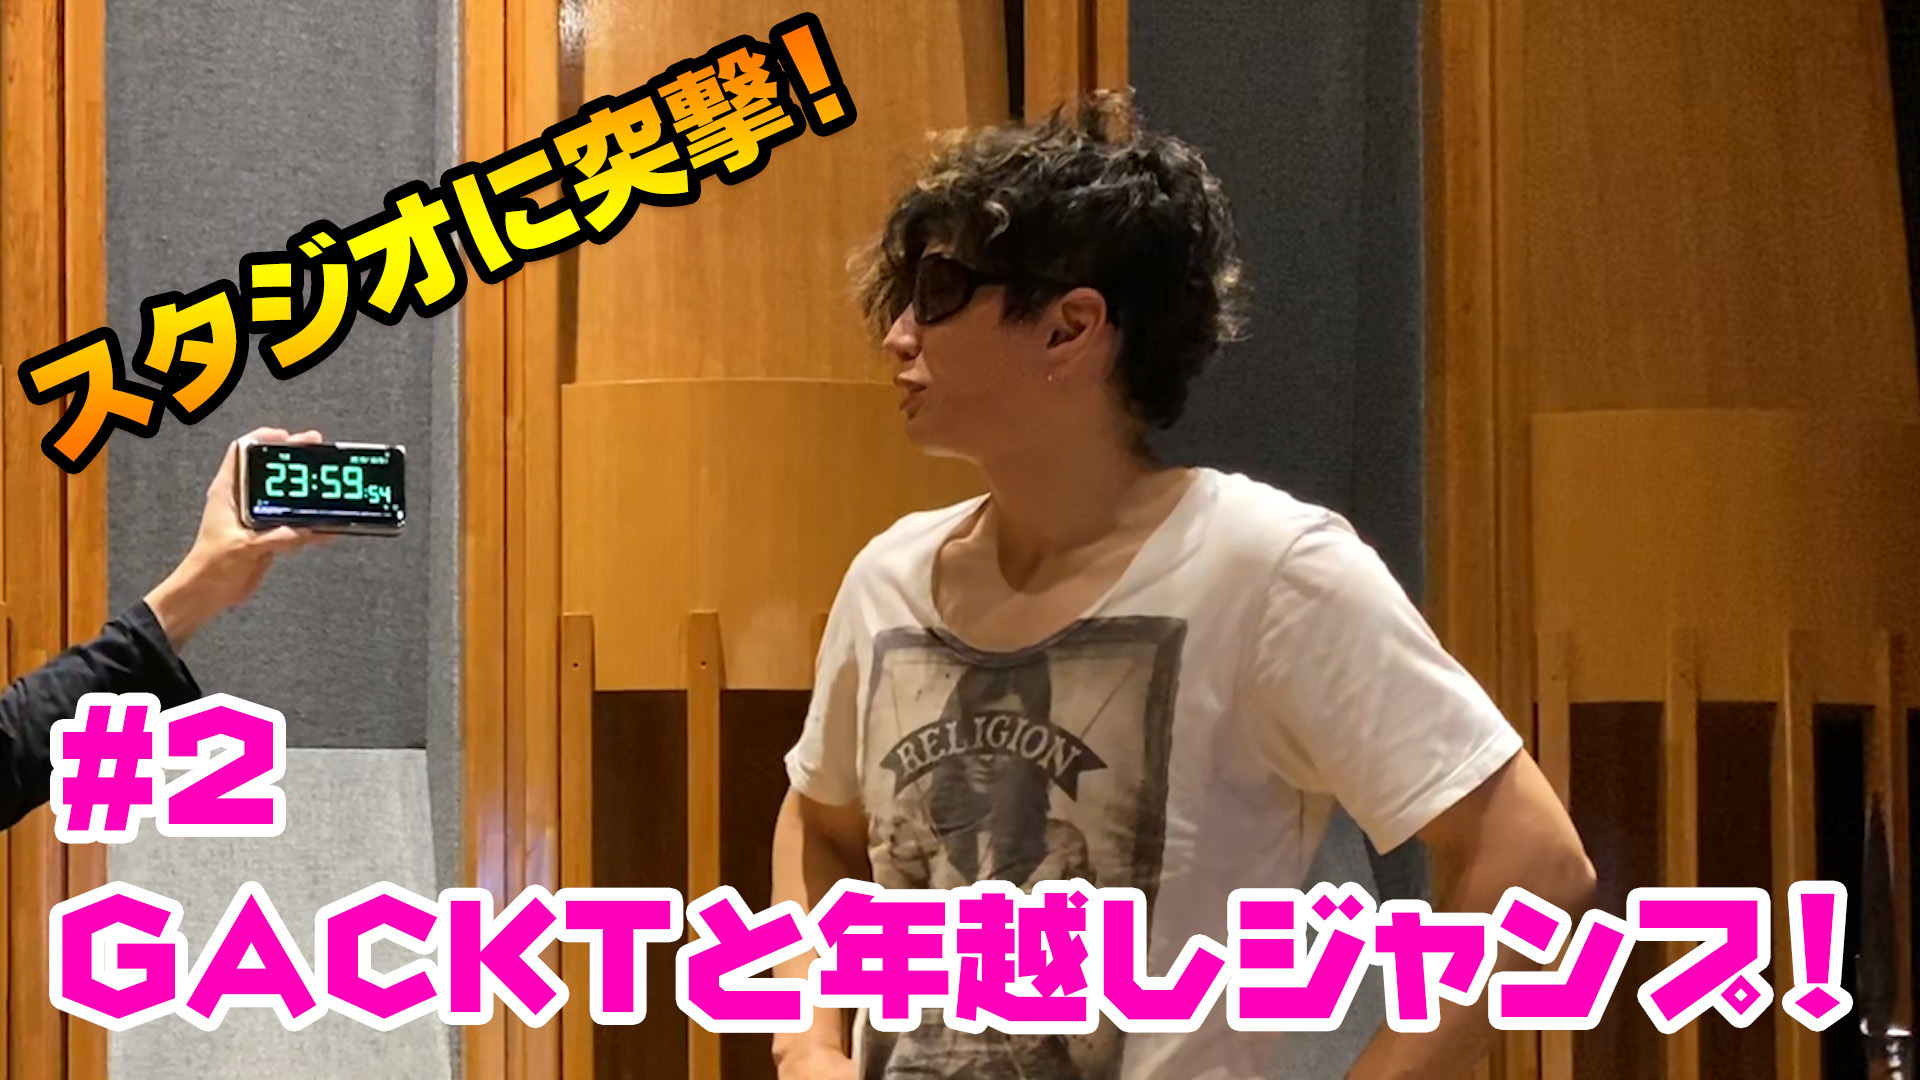 GACKT OFFICIAL YOUTUBE『がくちゃん』#2 配信開始！ | GACKT OFFICIAL ...